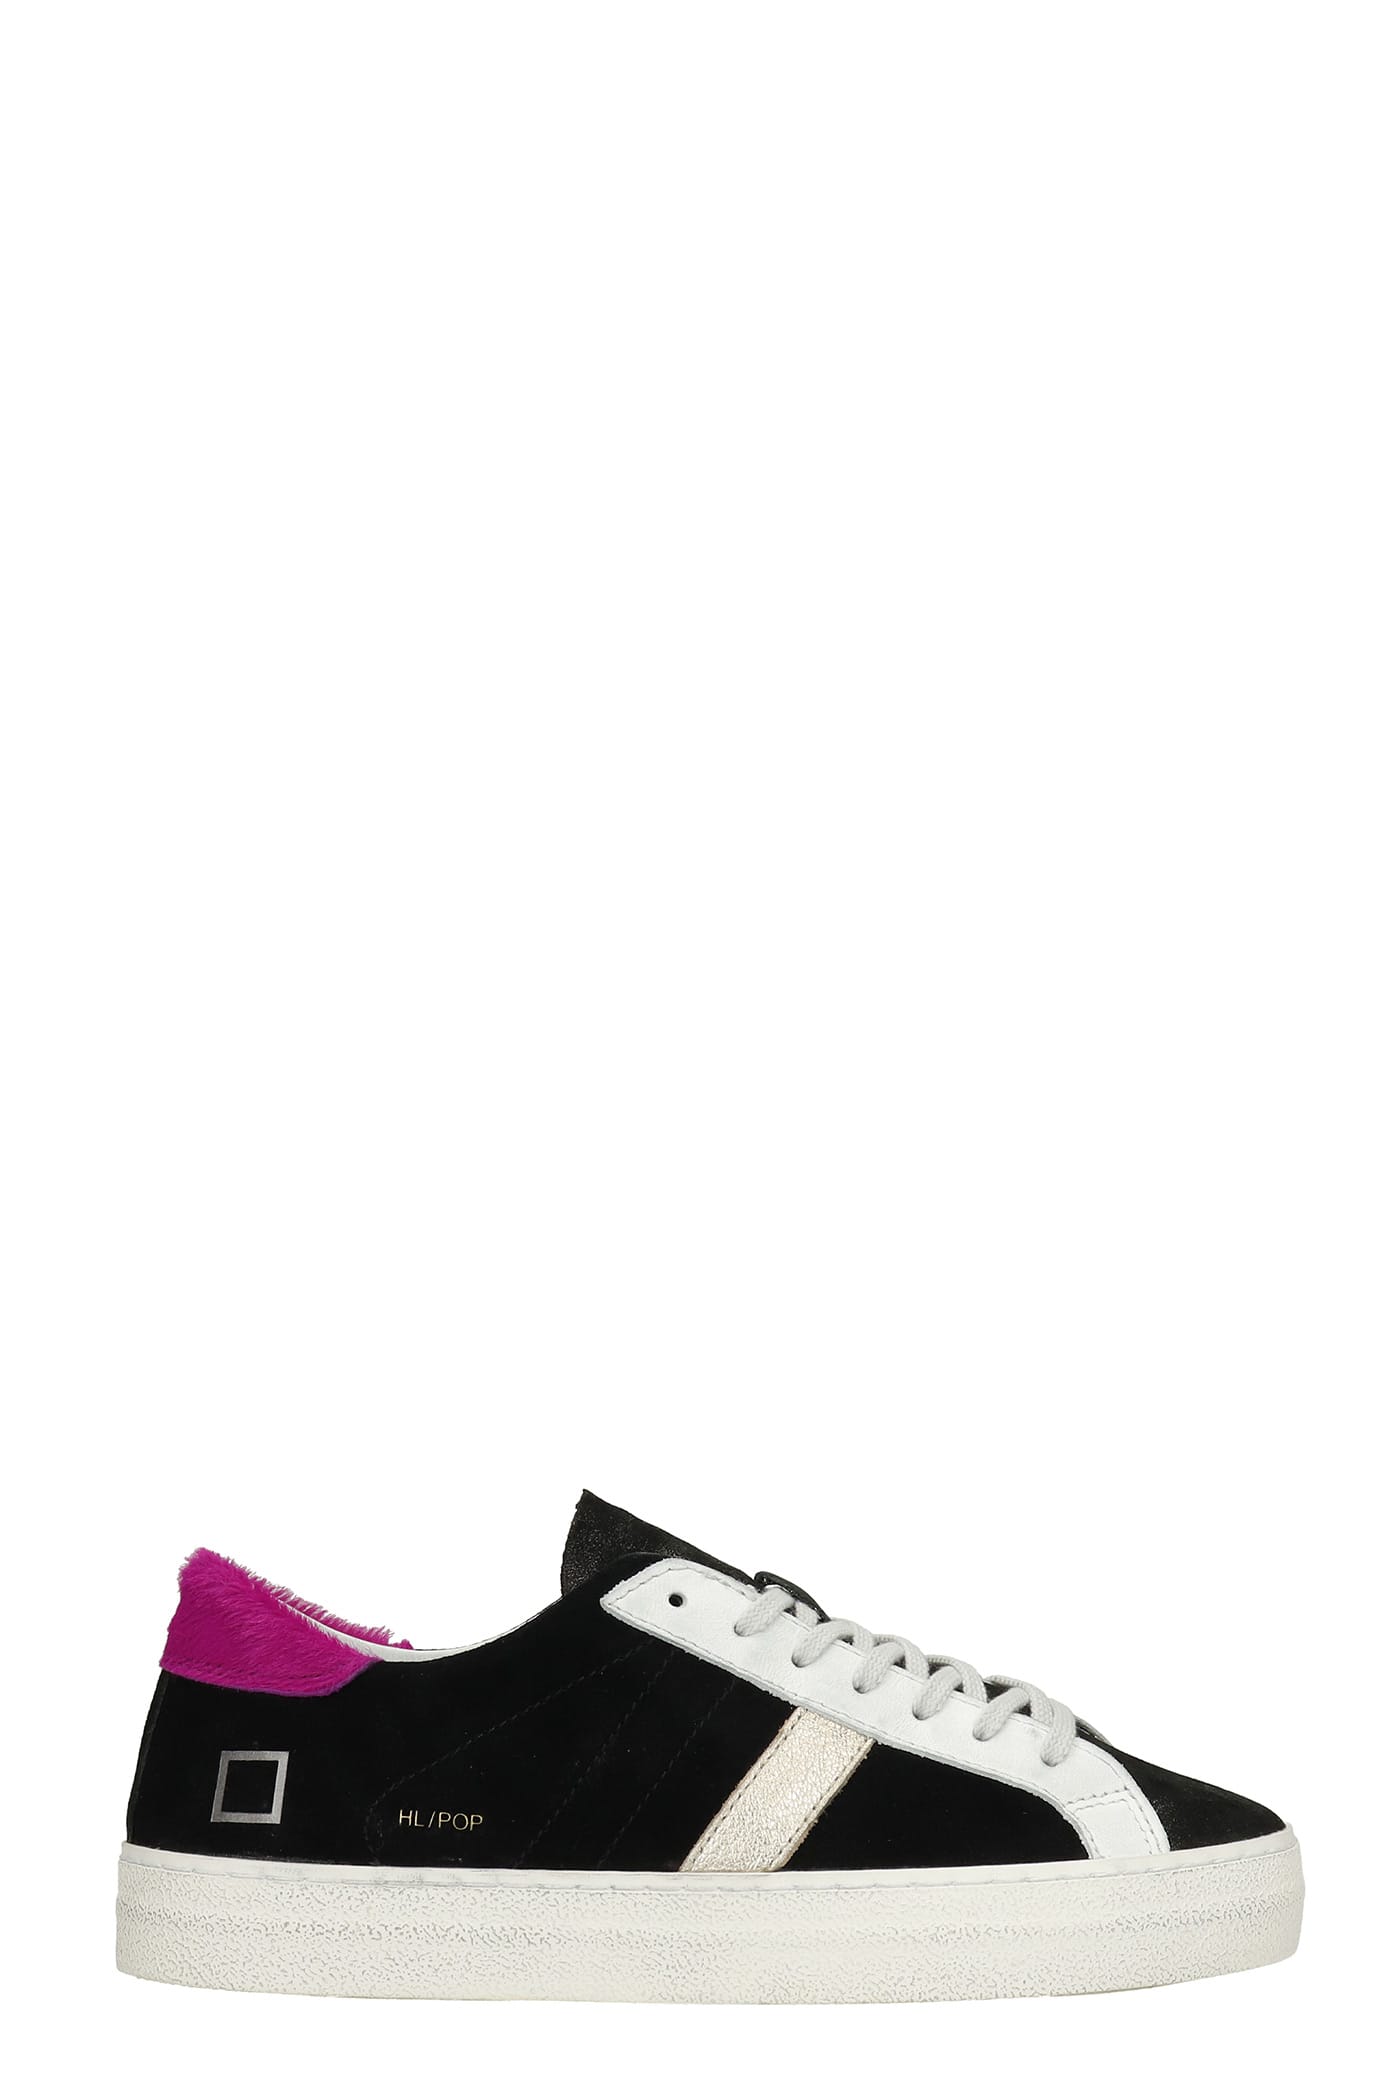 D.A.T.E. Hill Low Sneakers In Black Suede